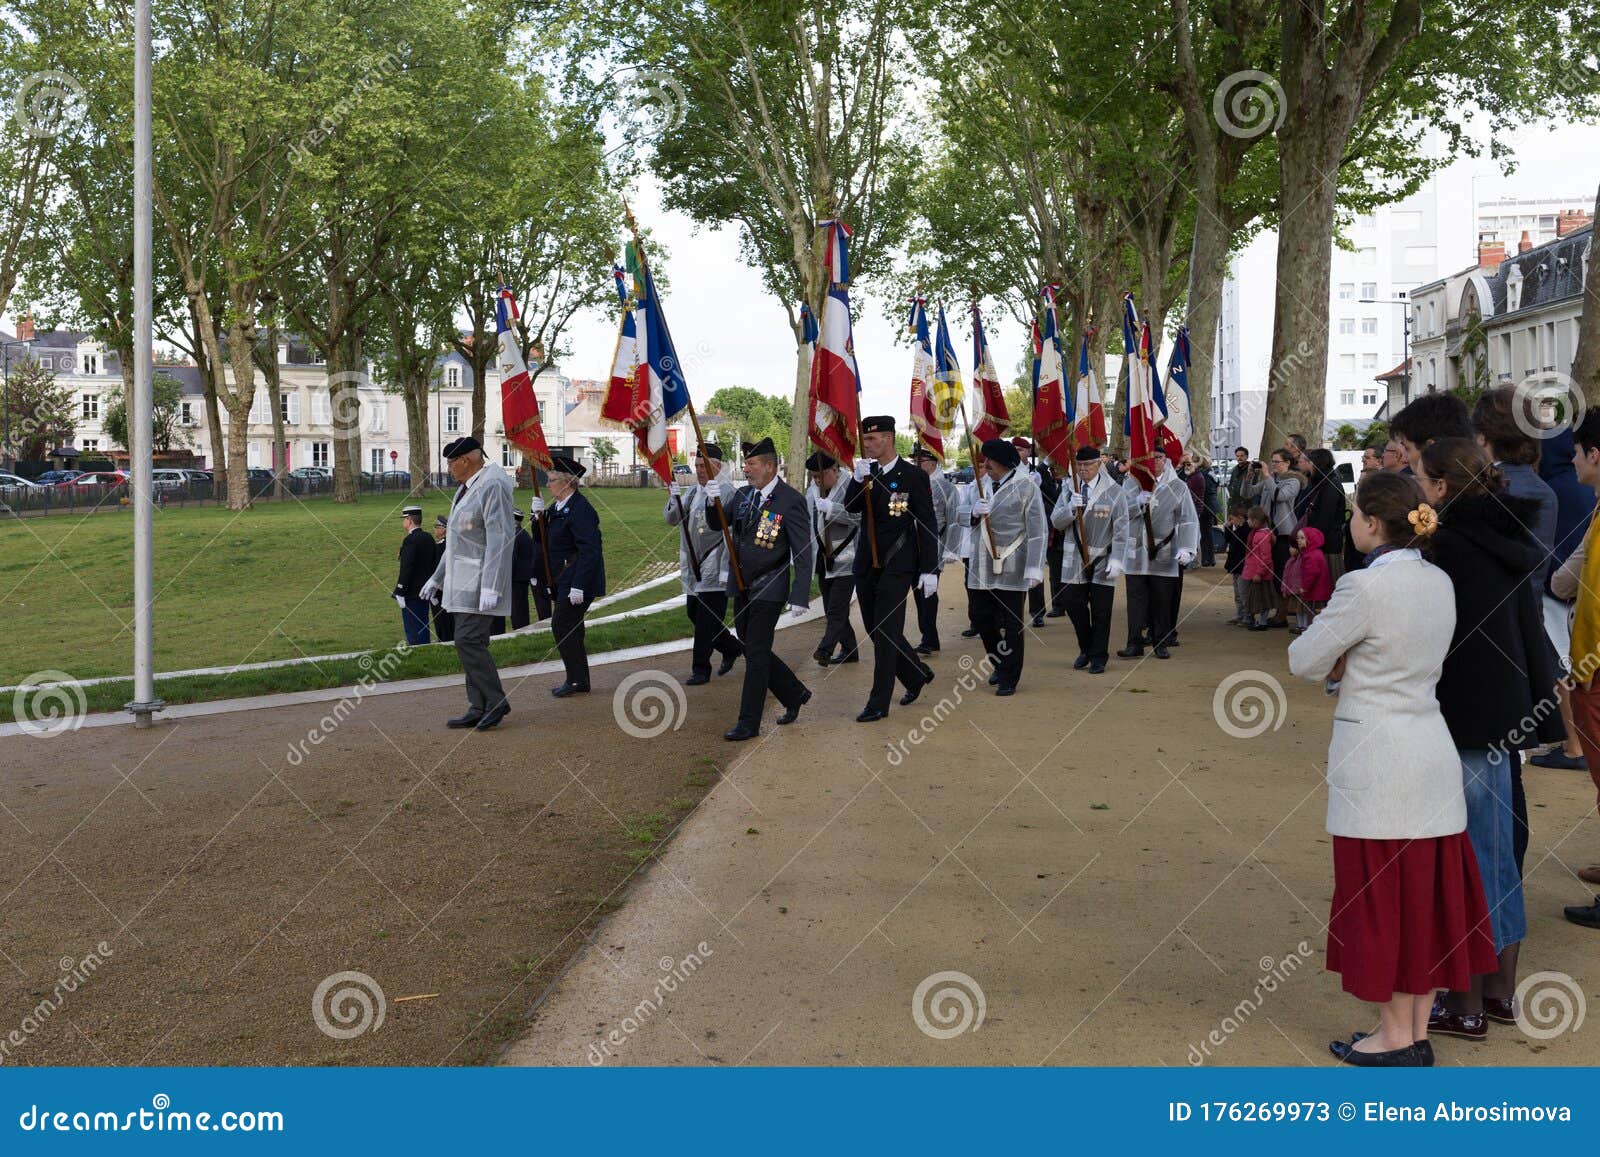 Veterans Marching with Flags, Crowd of People, 8 May Victory Day in